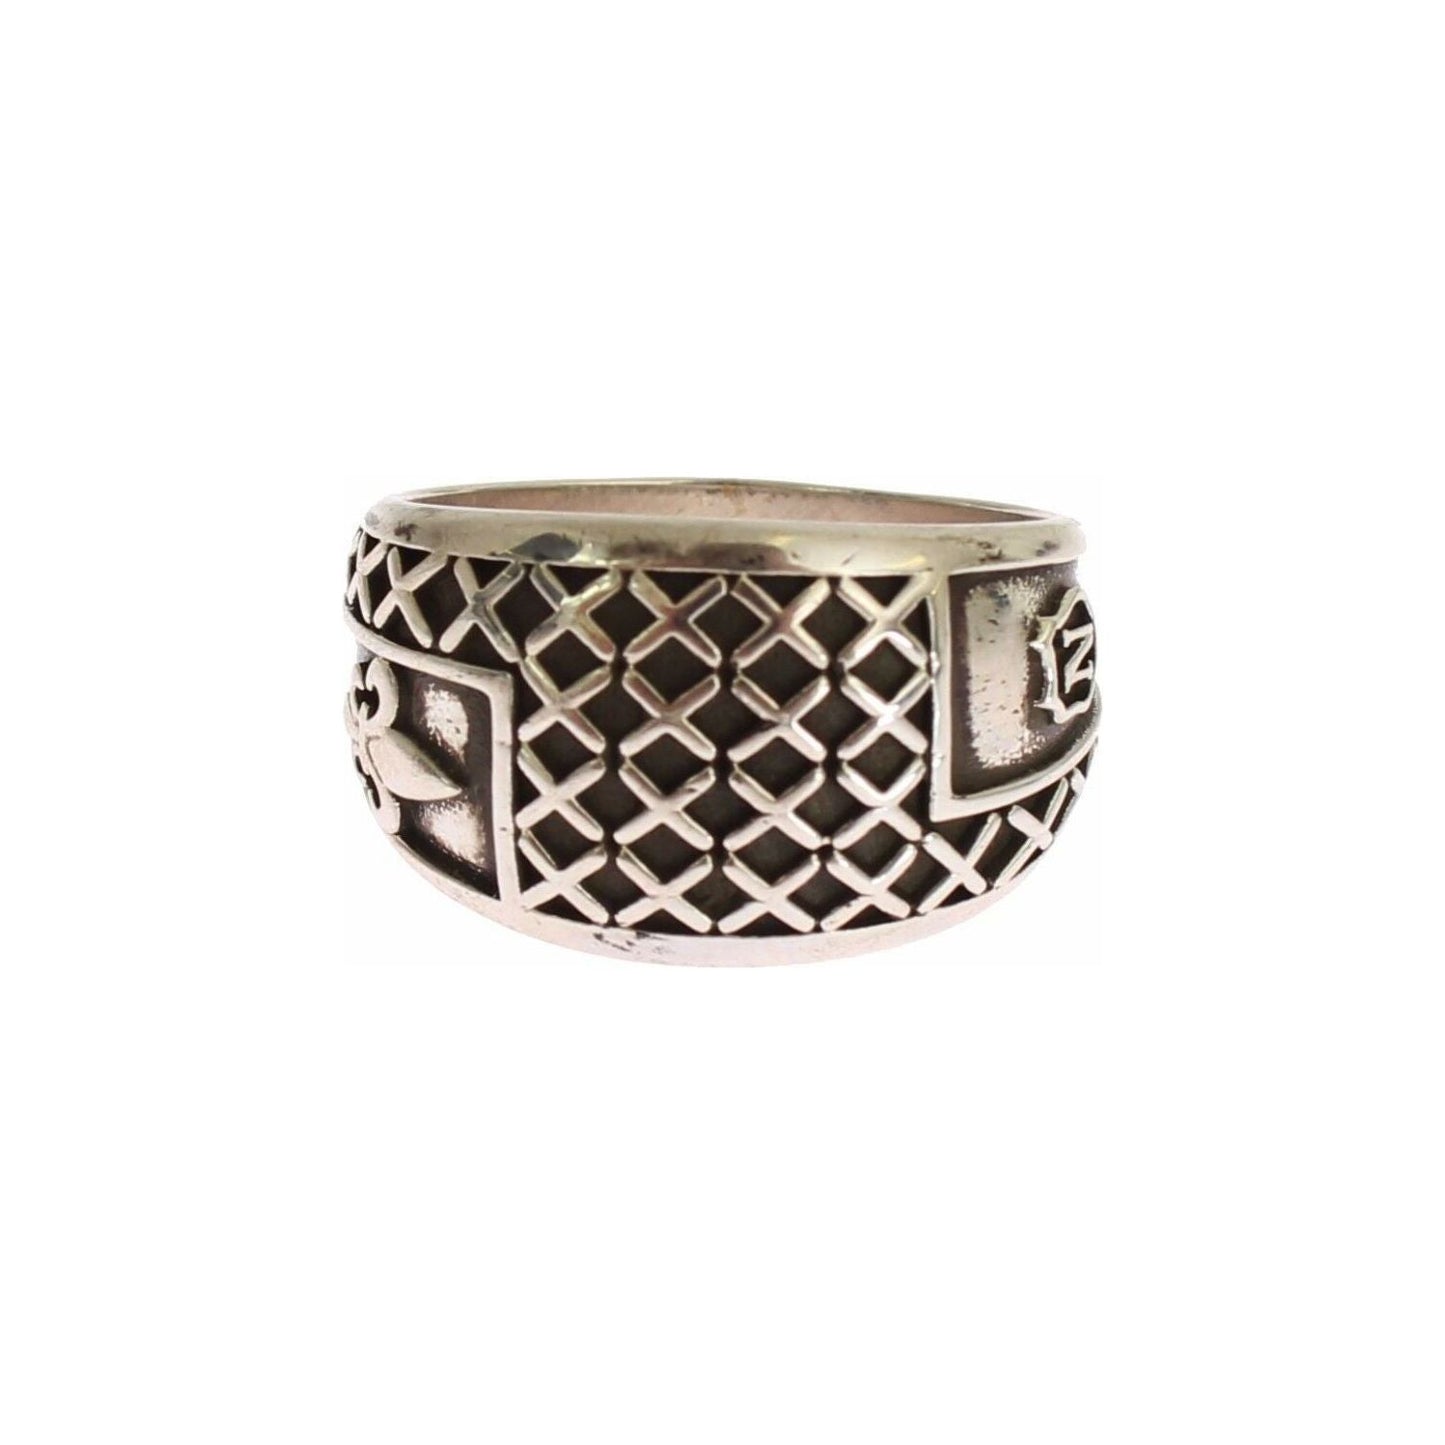 Nialaya Elegant Silver Band with Black Accents Ring silver-rhodium-925-sterling-ring s-l1600-21-2-9481a289-38e_cab38f4d-2ed5-4285-b0f2-00c404d0a941.jpg